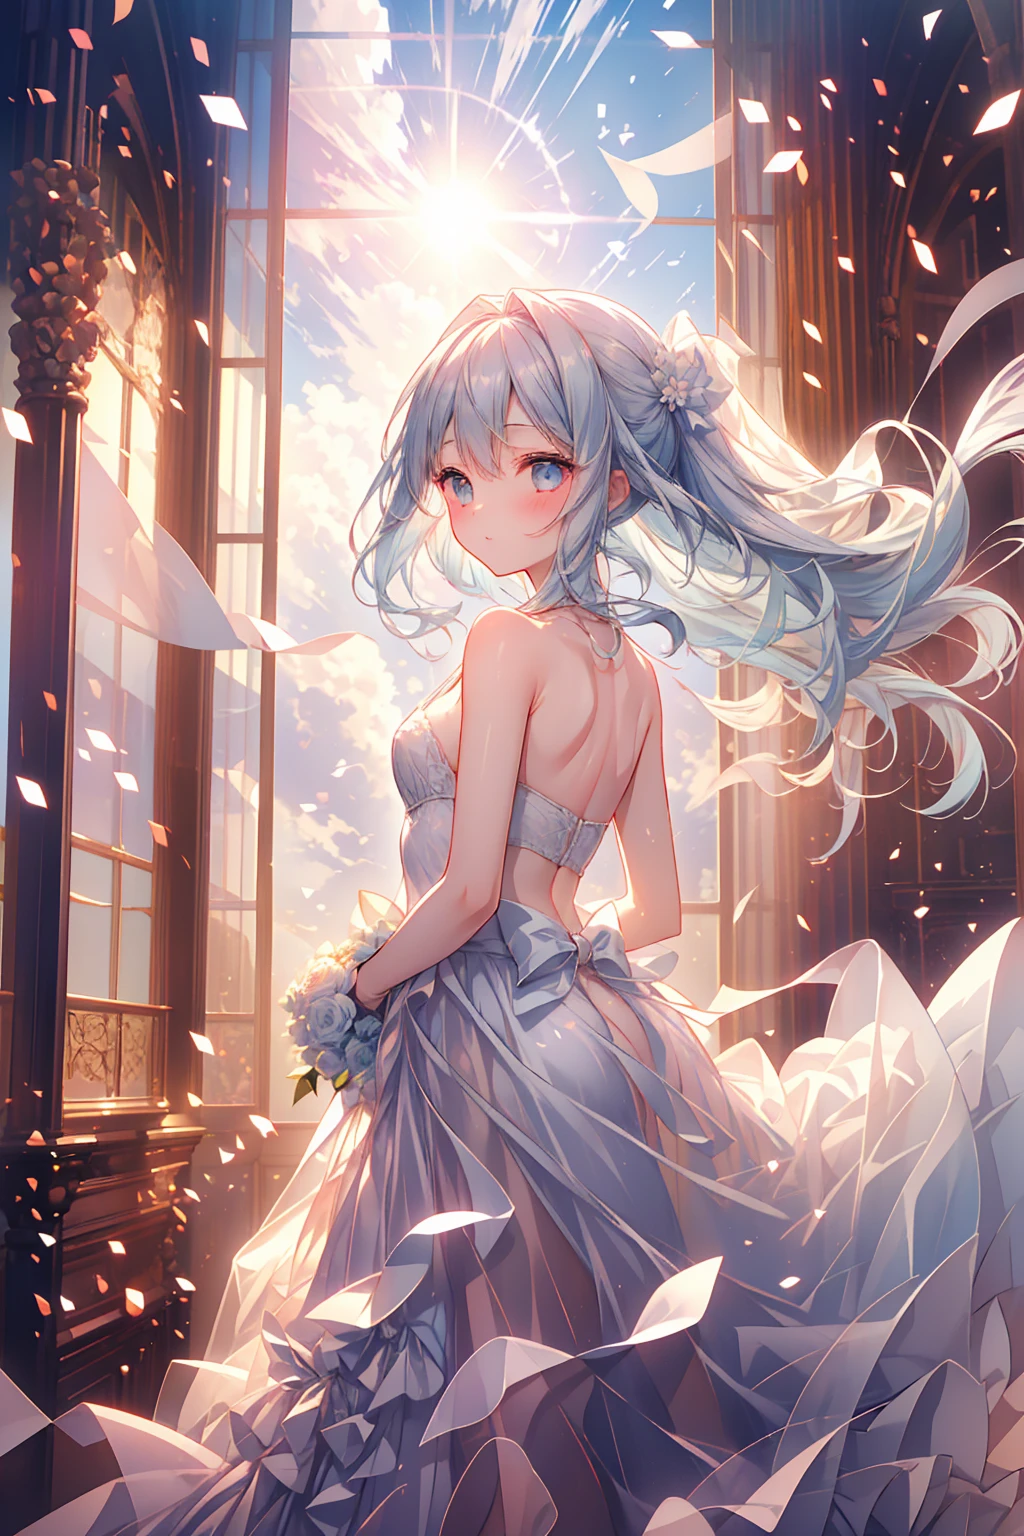 masterpiece, best quality, extremely detailed, (illustration, official art: 1.1), 1 girl, (((light blue long hair))), light blue hair, 10 years old, long hair ((blush)), cute face, big eyes, masterpiece, best quality, (((a very delicate and beautiful girl)))), amazing, beautiful detailed eyes, blunt bangs (((little delicate girl)))), tareme .(true beautiful: 1.2), sense of depth, dynamic angle,,, affectionate smile, ???, (8K, HDR, highres), (((photography, RAW photo, hyperrealism, masterpiece, best quality, ultra highres))), (pin light, back light, backlighting, cinematic light), sharp focus: 1. 4, (hyper detail, detailed), full body,1girl, in a field of reeds where the wind blows as the sun sets, there stands a girl in a wedding dress The dress is a flowing white gown that catches the breeze and dances with the wind. The girl's light blue hair is loose and tousled, and she holds a bouquet of wildflowers in her hands. As the sun sets behind her, casting a warm golden light over the field, she stands tall and serene, like a vision of beauty and grace, oval face,  small and pretty but plump lips, 